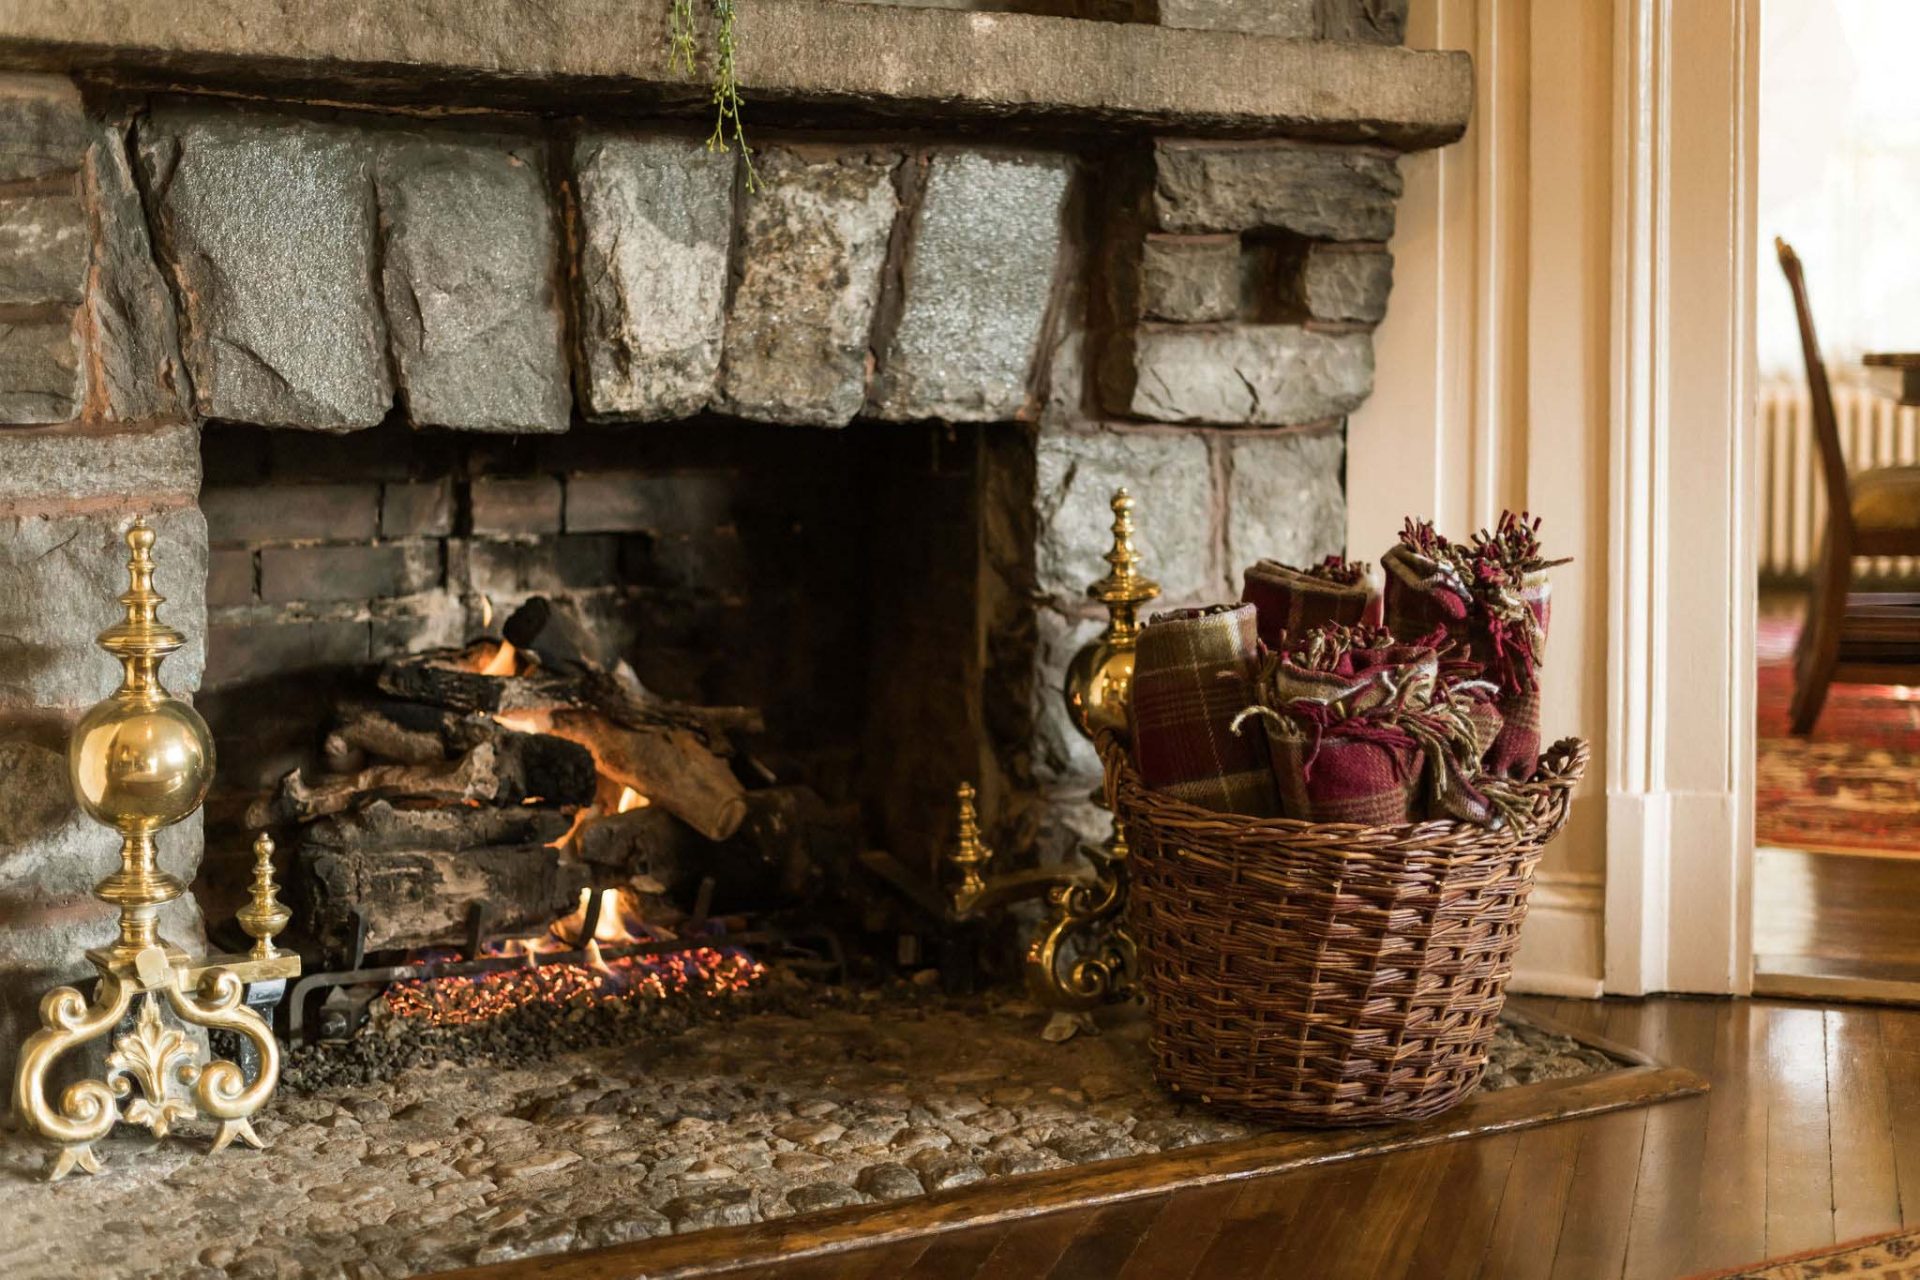 A close-up of a stone fireplace with a woven basket full of blankets